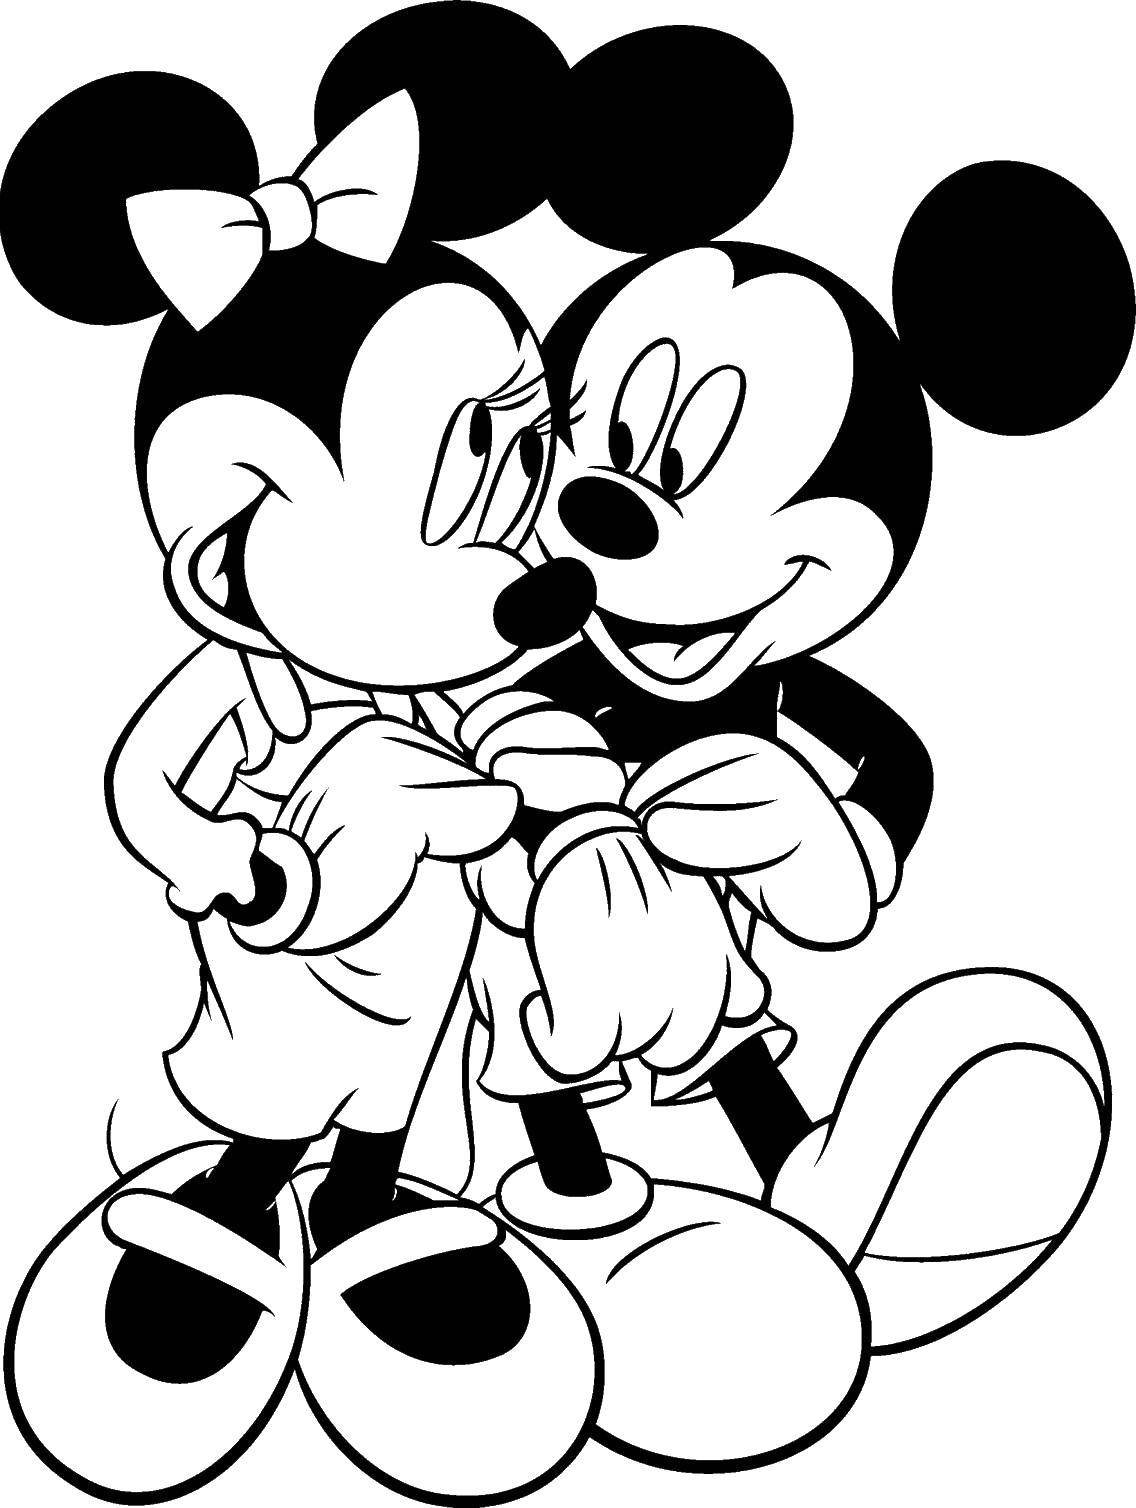 Coloring Sweethearts Mickey and Minnie mouse. Category Cartoon character. Tags:  Disney, Mickey Mouse, Minnie Mouse.